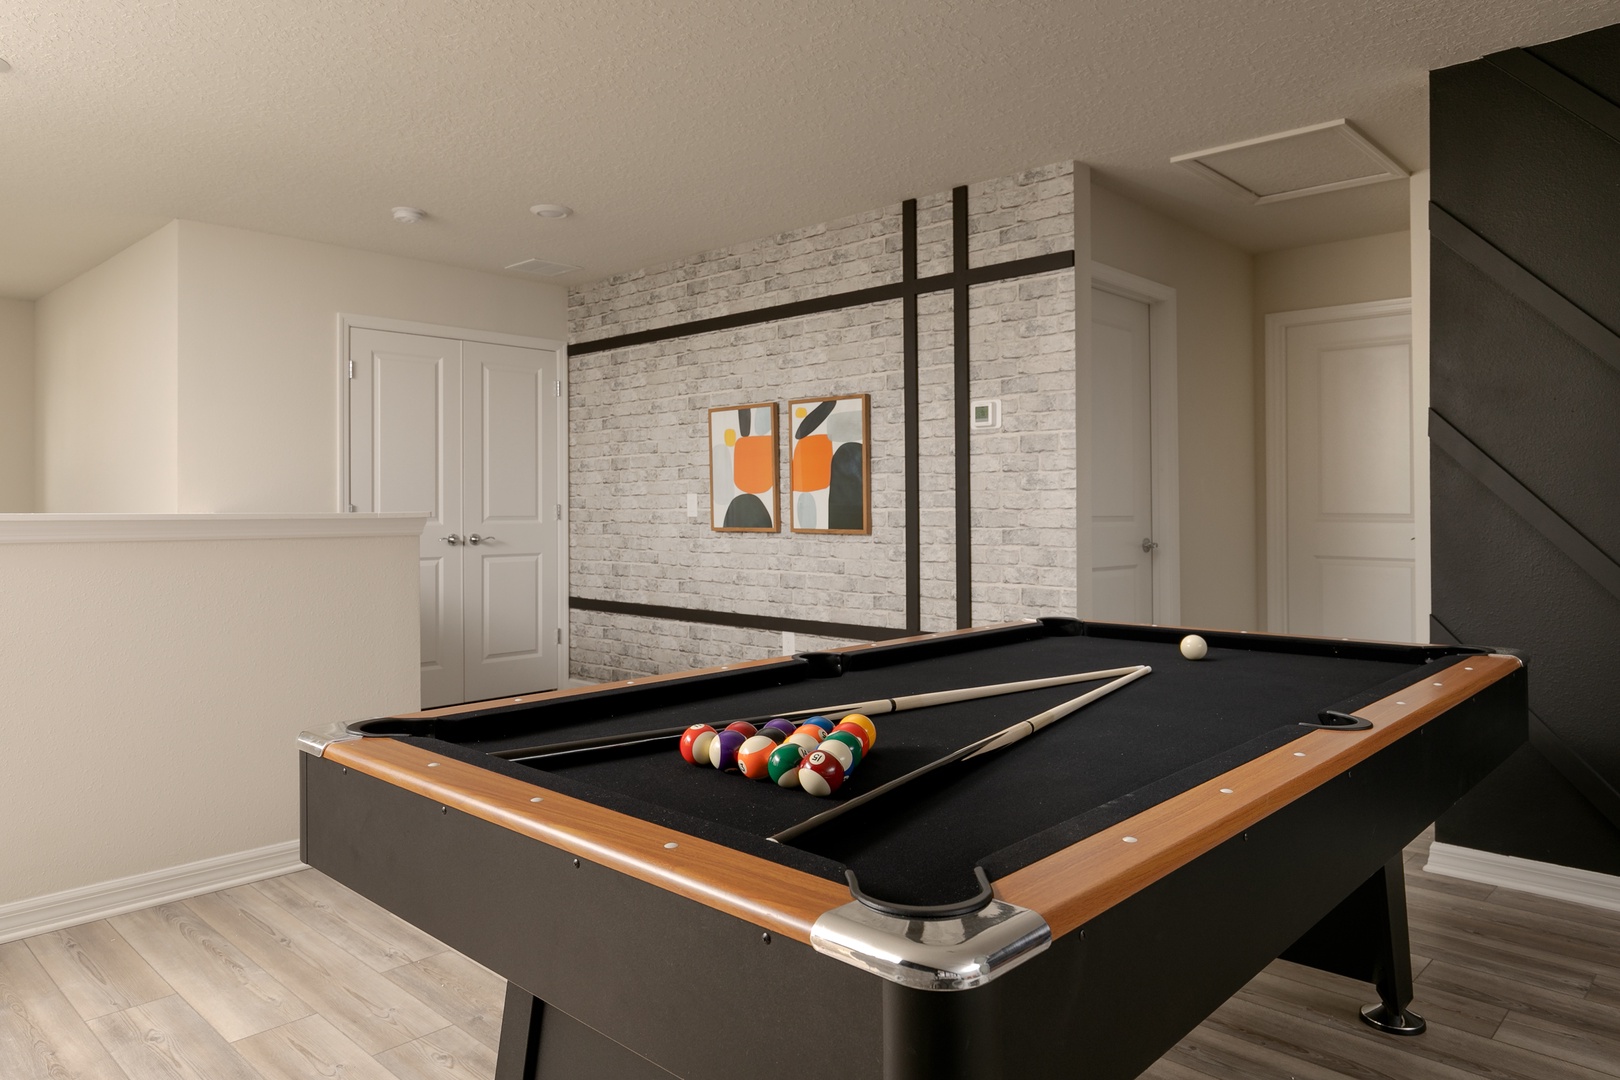 Get competitive with a game of pool or kick back & relax in the loft area